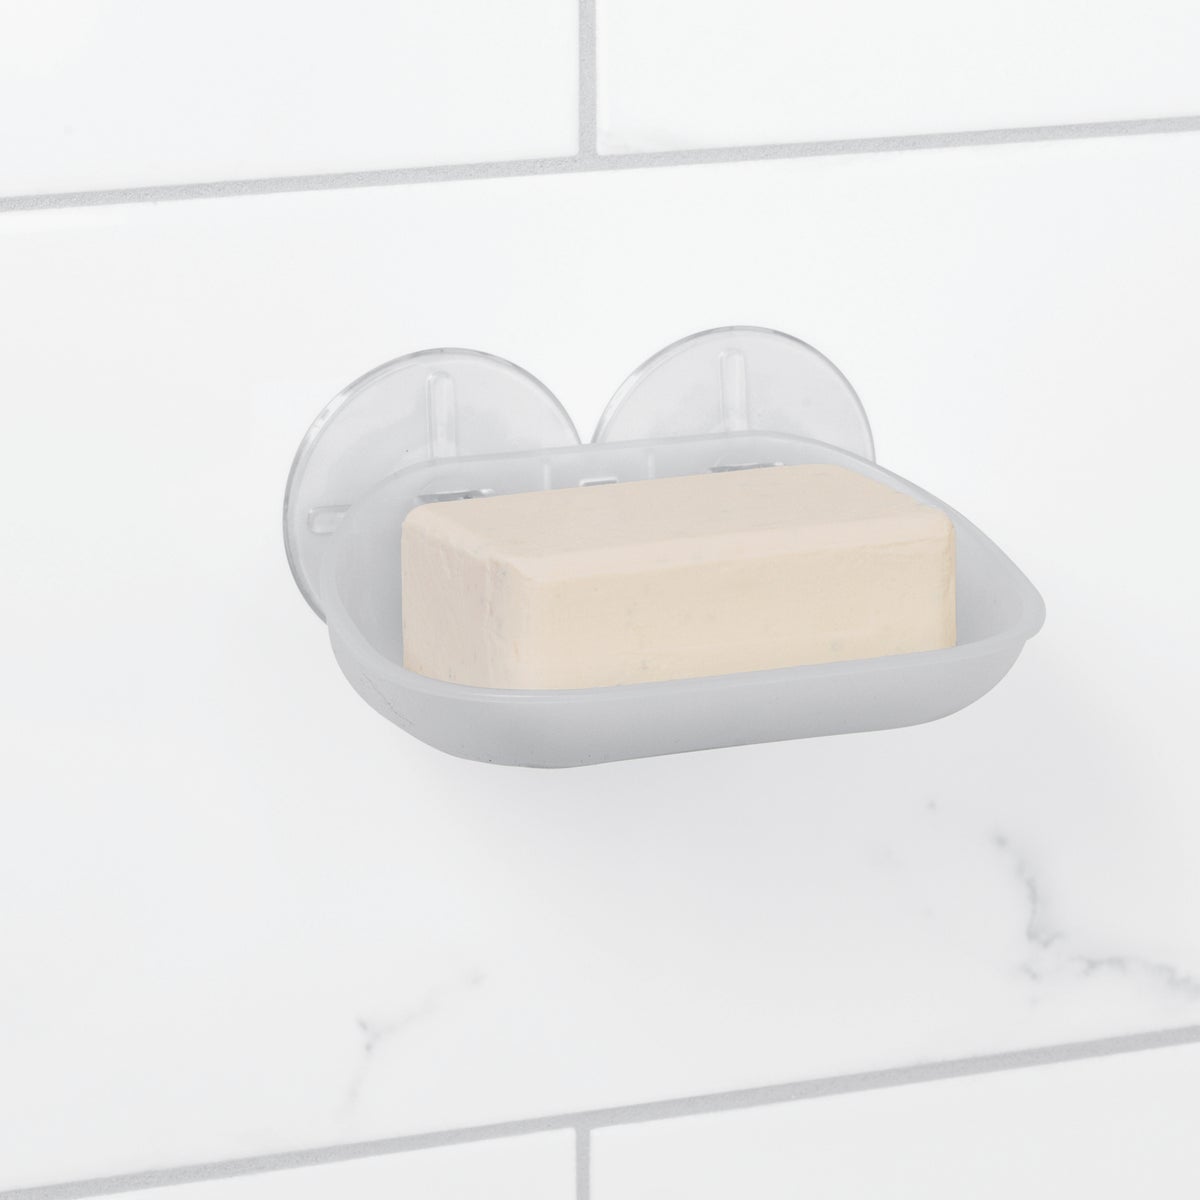 Zenith Zenna Home Frosted Finish Suction Soap Dish